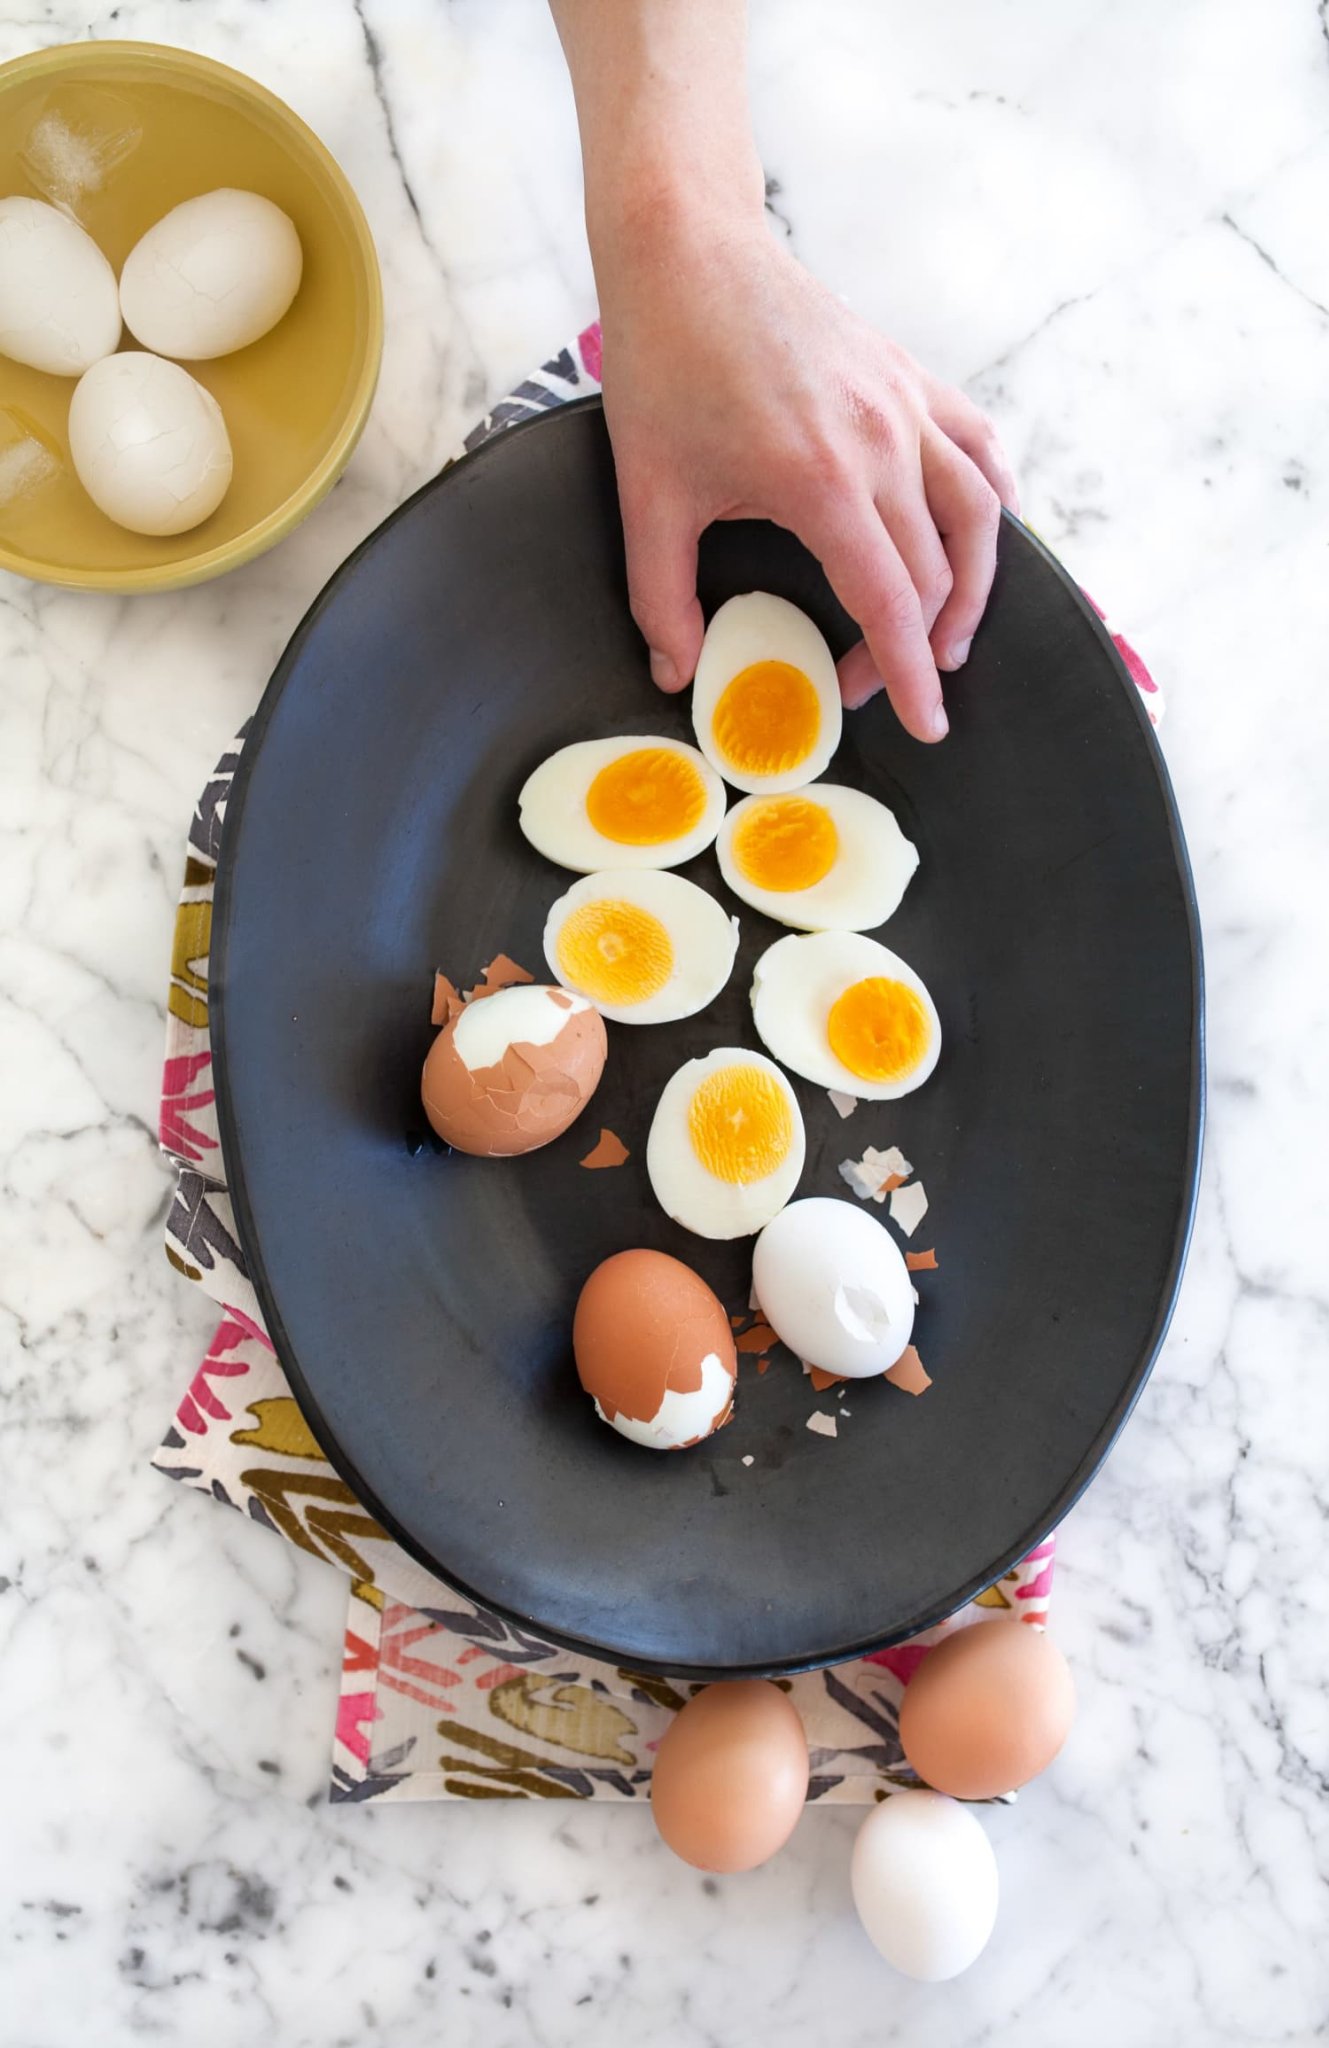 How To Hard Boil Eggs Perfectly Every Time